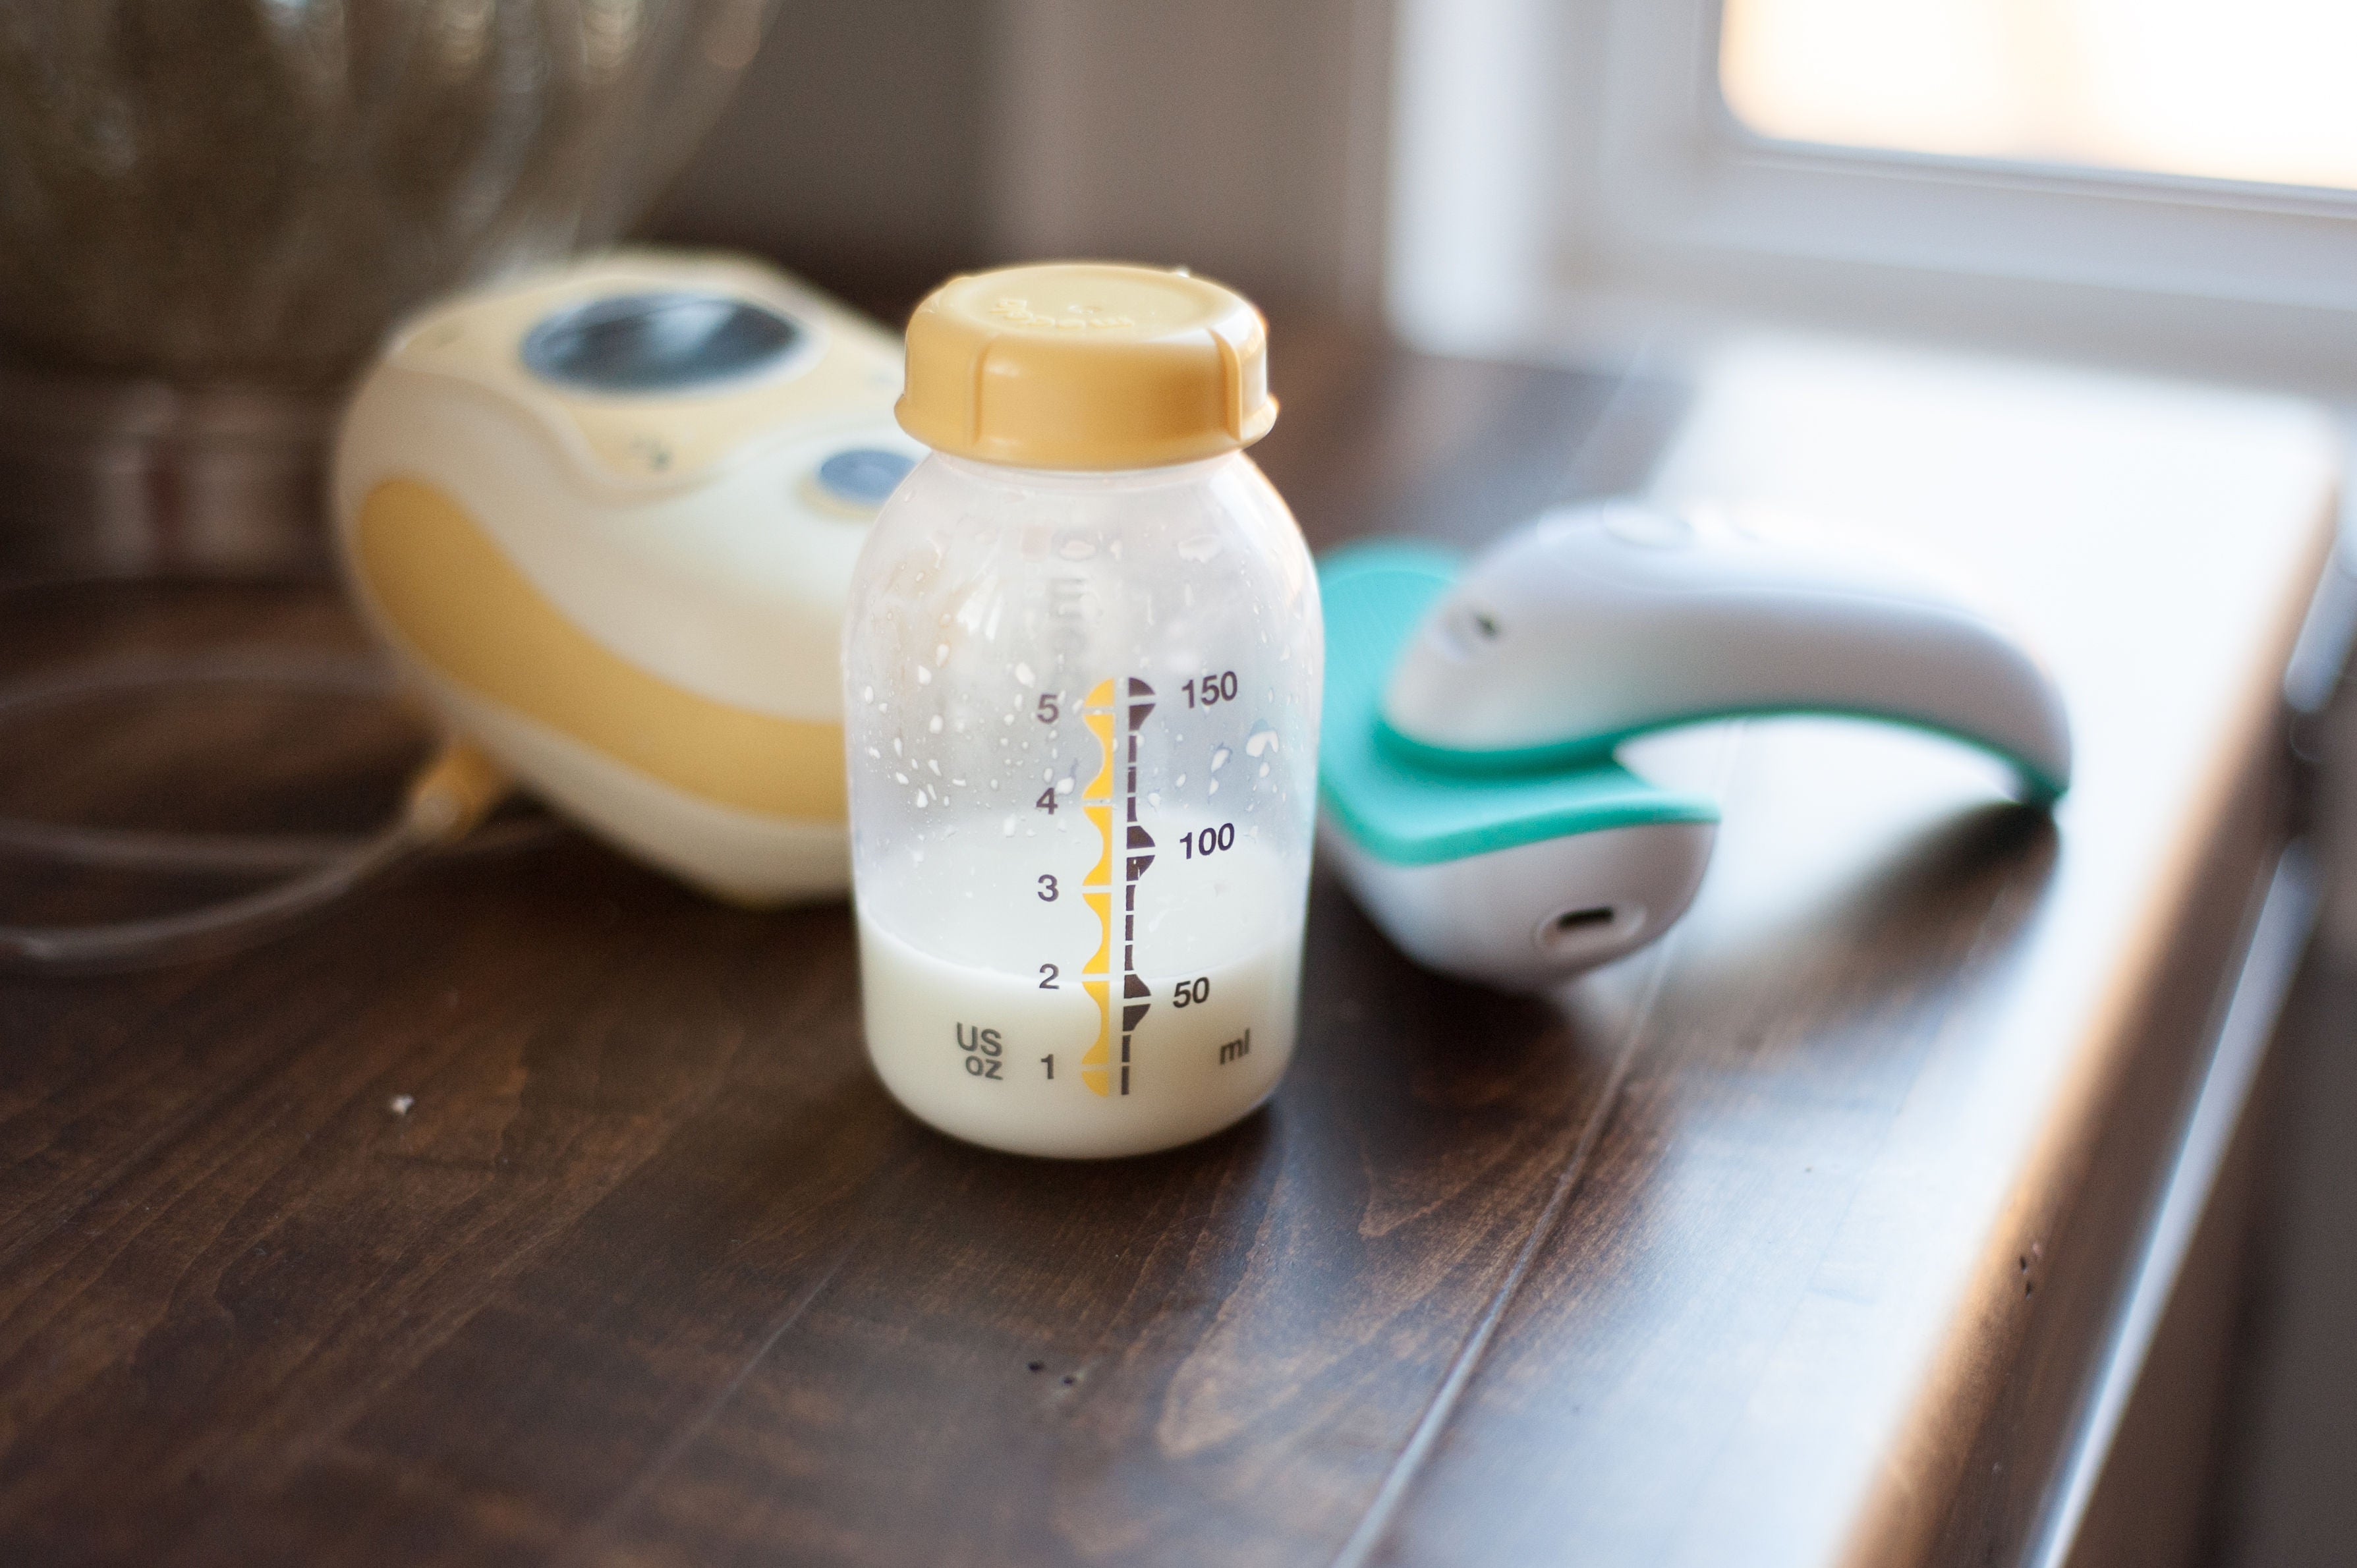 An Exhaustive Guide to Traveling with Breast Milk - Exclusive Pumping